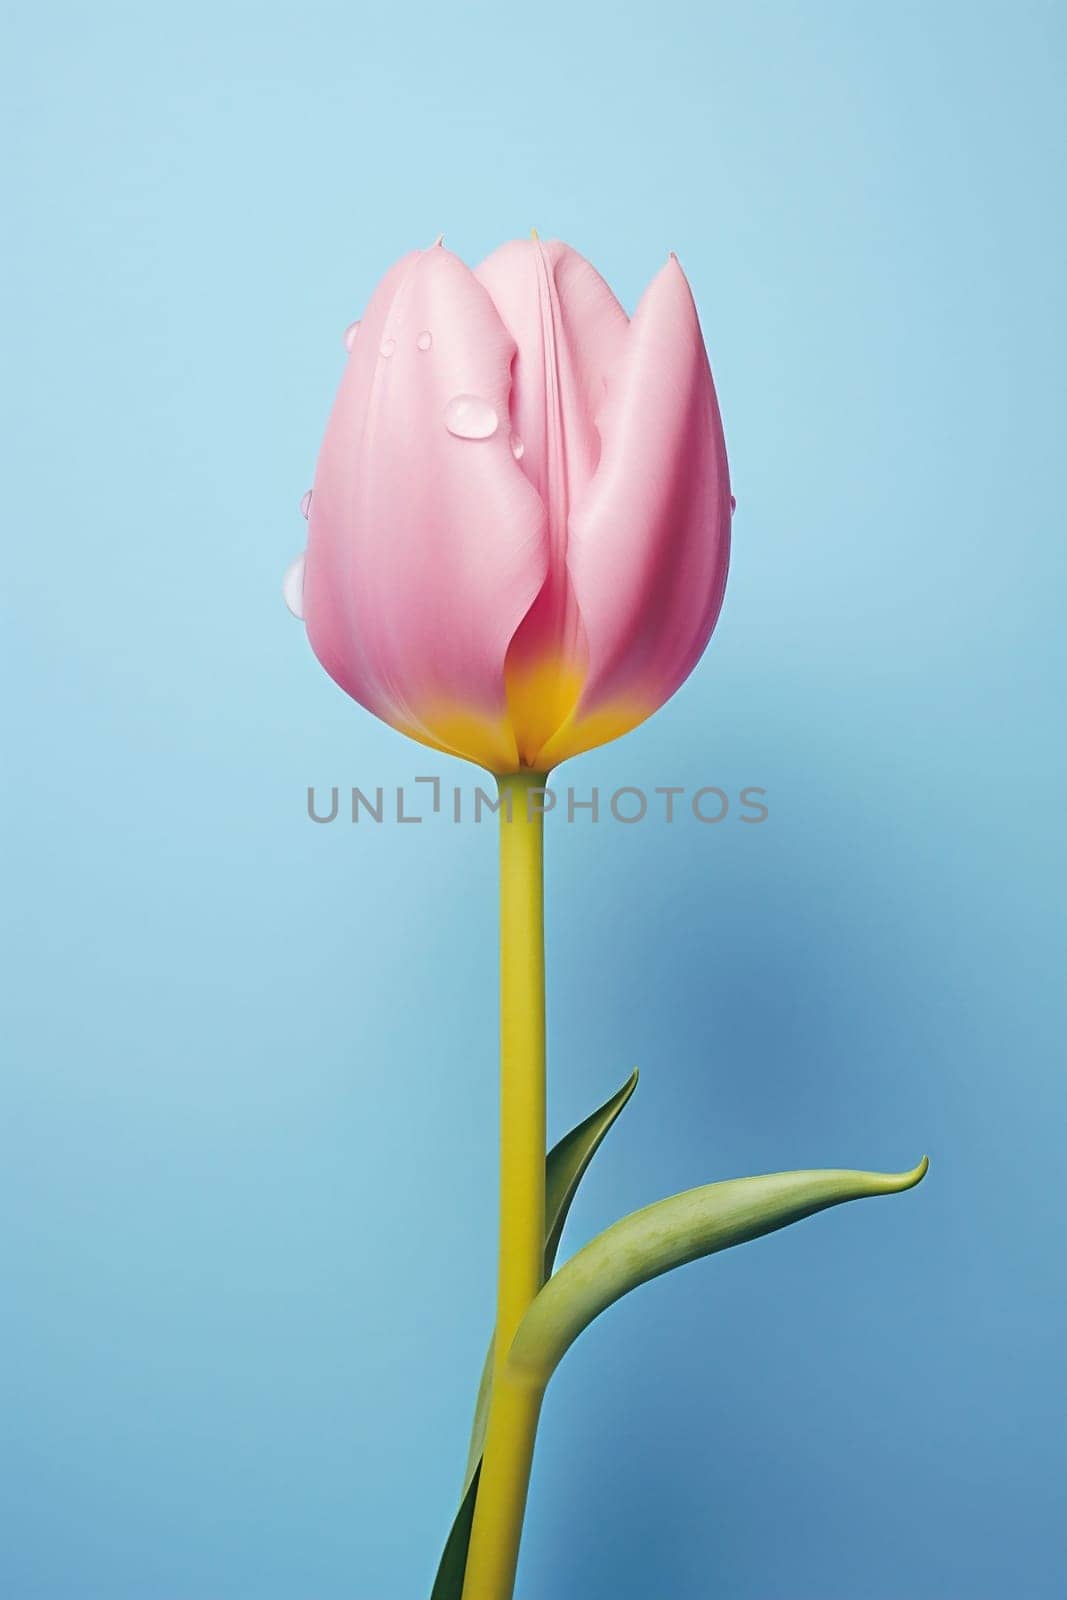 Tulip blossom spring bloom plant leaf pink nature valentine holiday day season bouquet flora isolated background beauty gift floral closeup flower green fresh